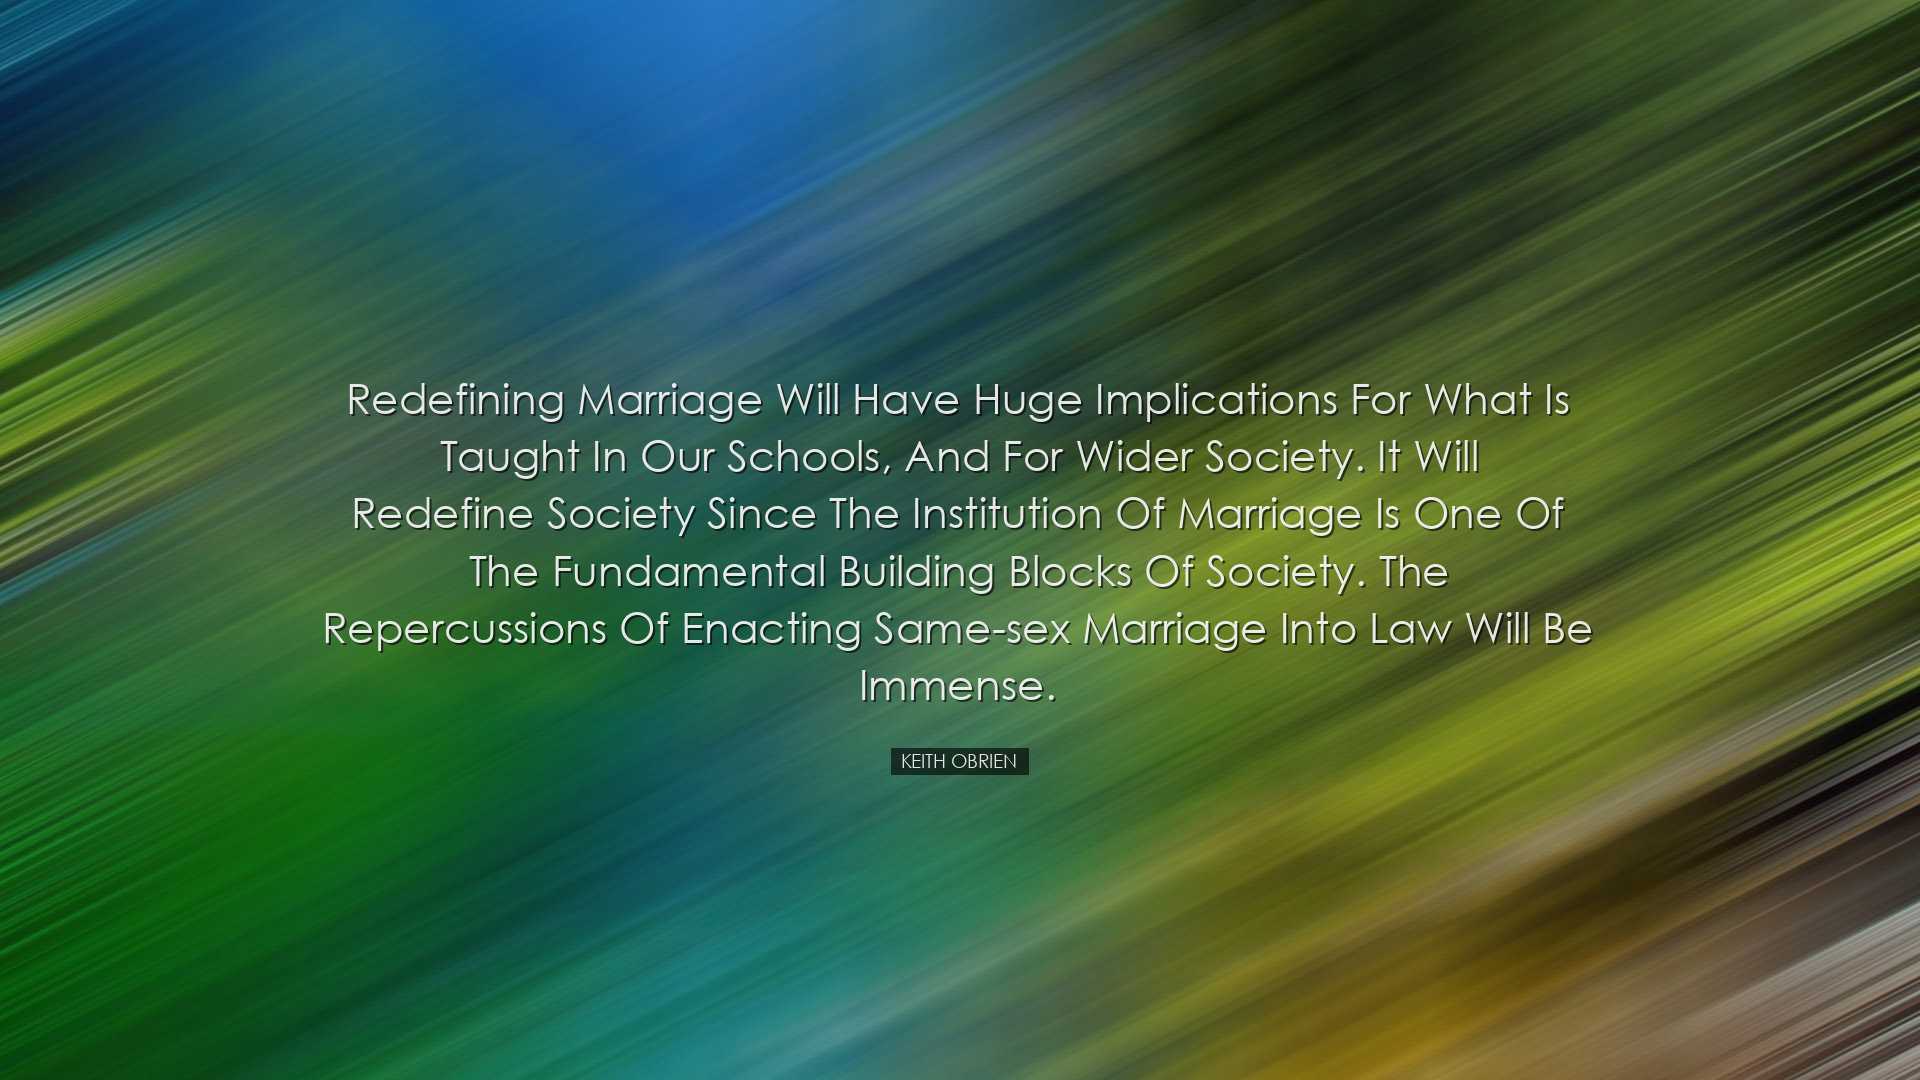 Redefining marriage will have huge implications for what is taught